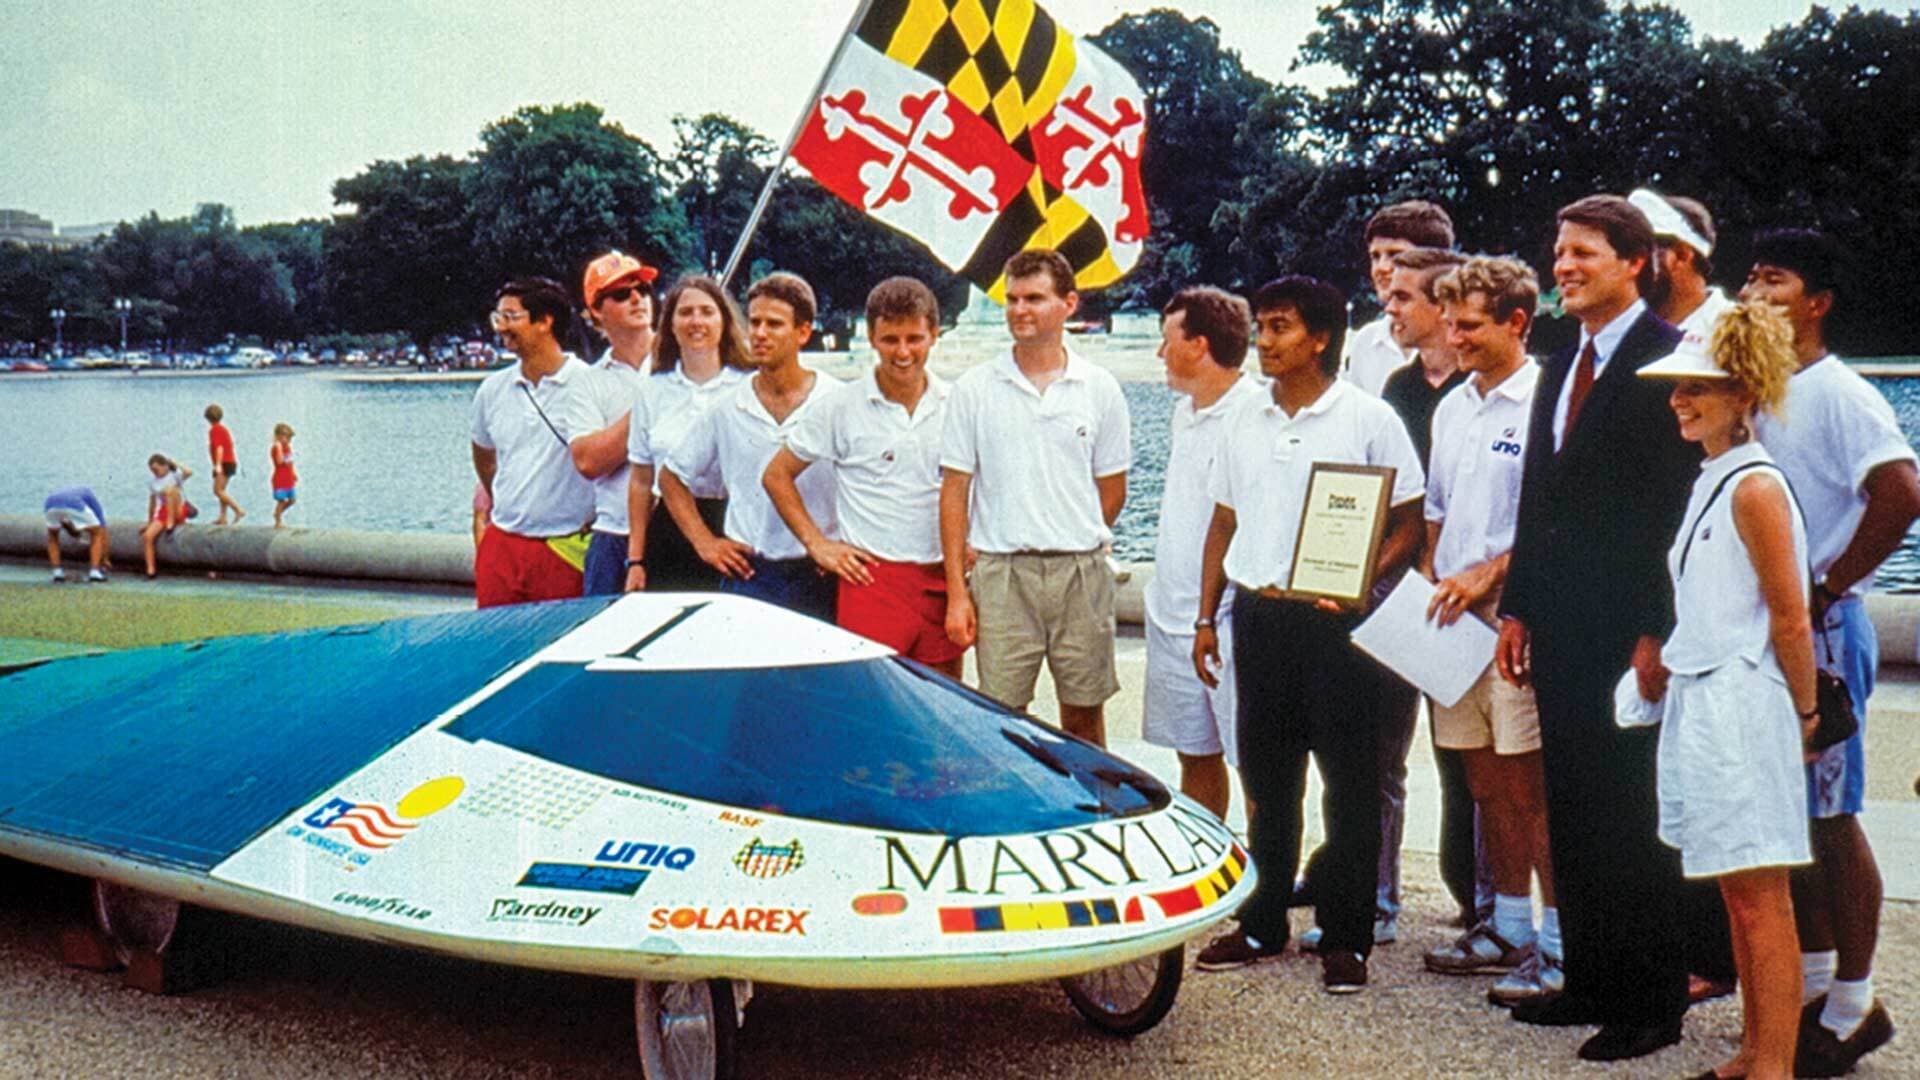 The solar-powered Pride of Maryland, designed and built by students, shown here with then Vice President Al Gore, placed third in the 1990 GM Sunrayce USA.